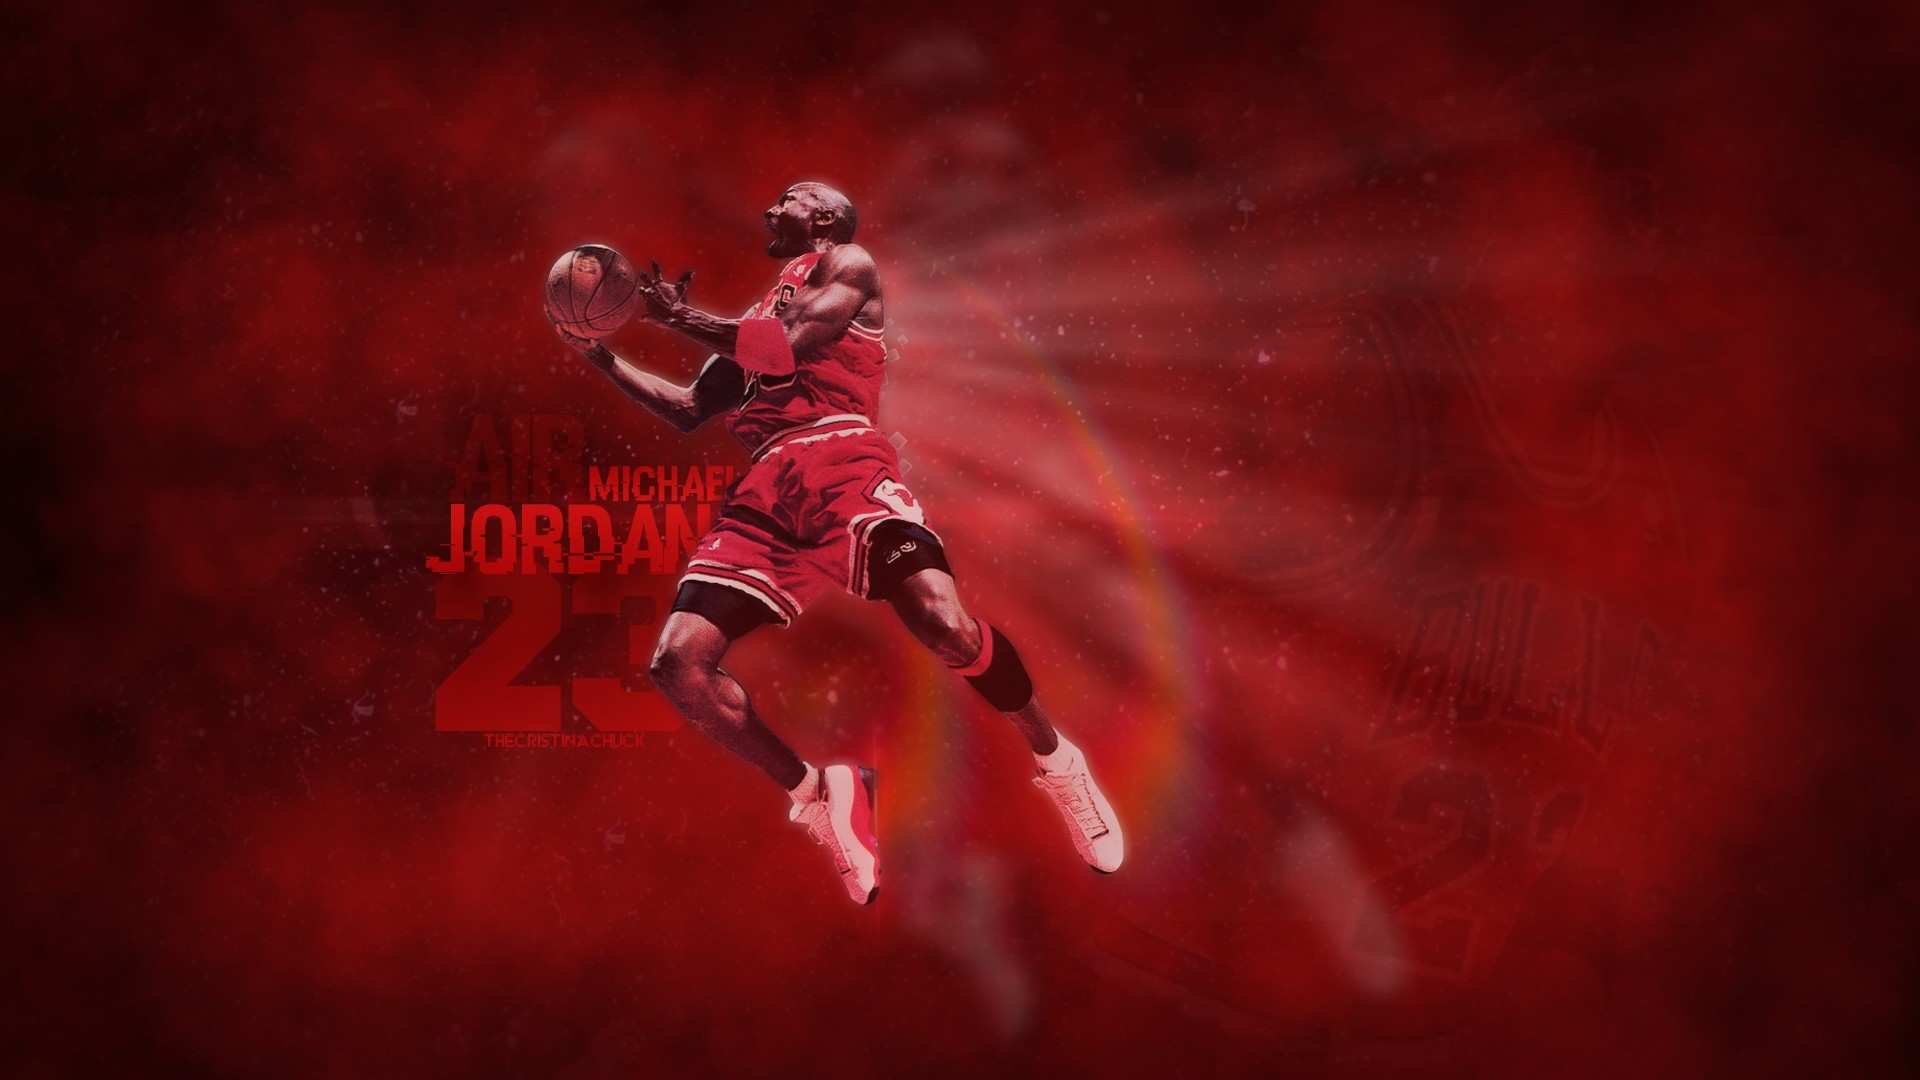 1920x1080  Jordan Wallpapers HD free download | Wallpapers, Backgrounds,  Images .